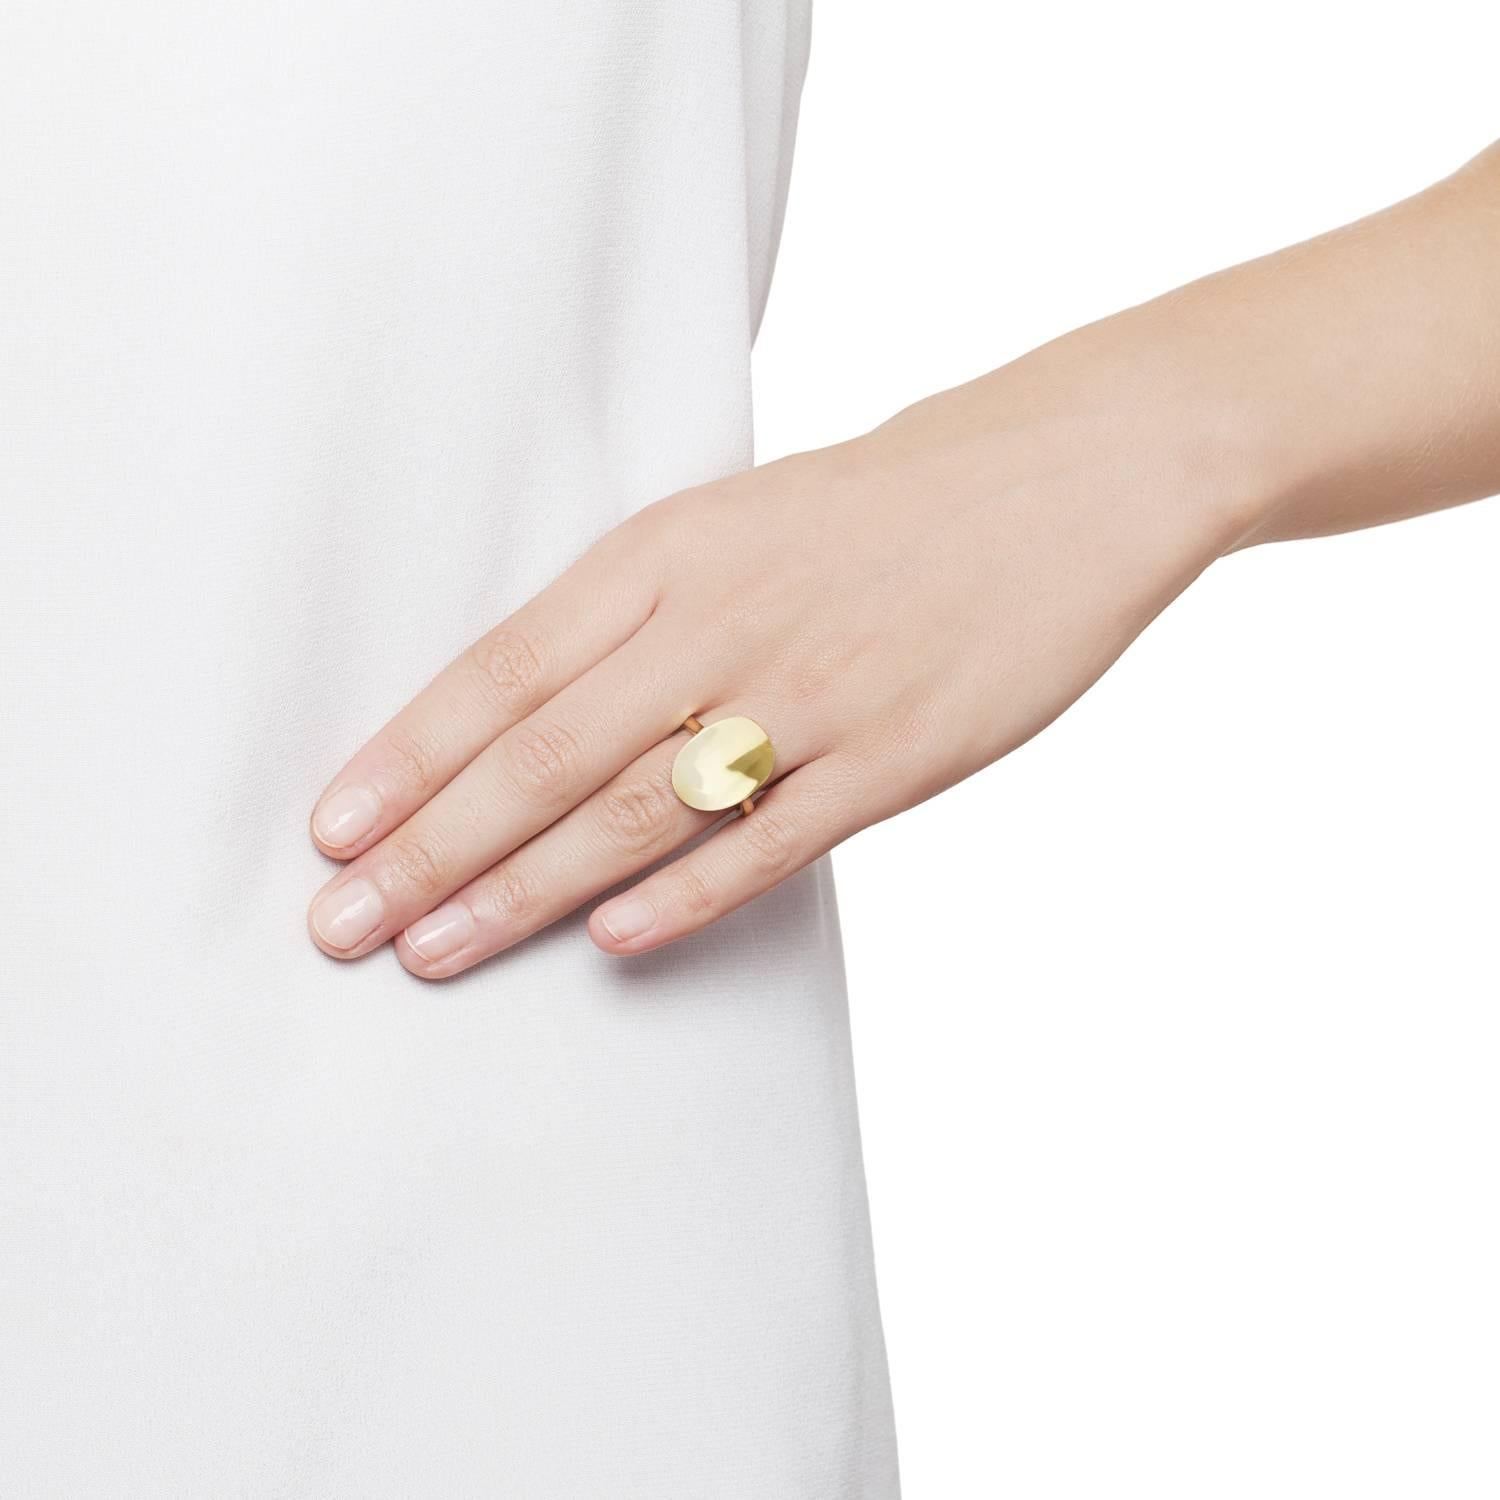 Yellow Gold Sculptural Oval Ring in a pure simple graphic concave form allowing the play of light on the polished surface. The Ellipse design featuring a perfectly balanced concave form that plays with reflections of light from its high mirror